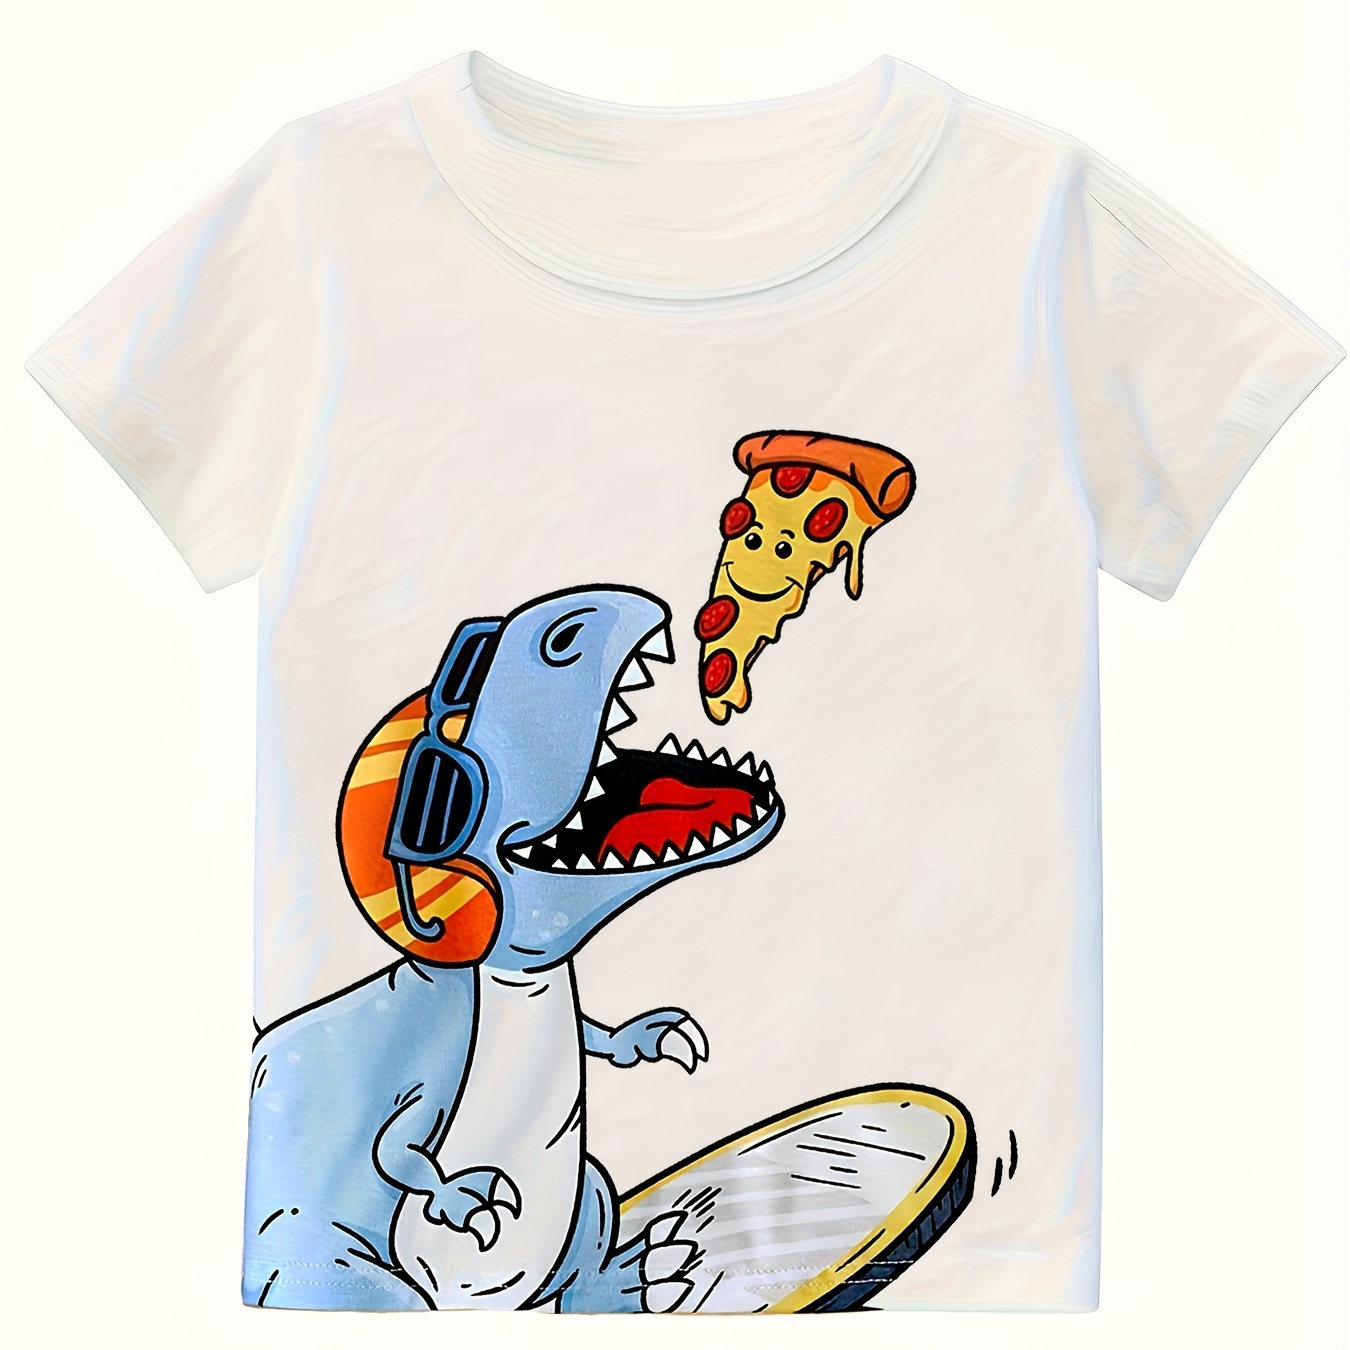 

Dinosaur Eating Pizza Print, Boy's Graphic Design Crew Neck Short Sleeve T-shirt, Casual Comfy Top For Summer